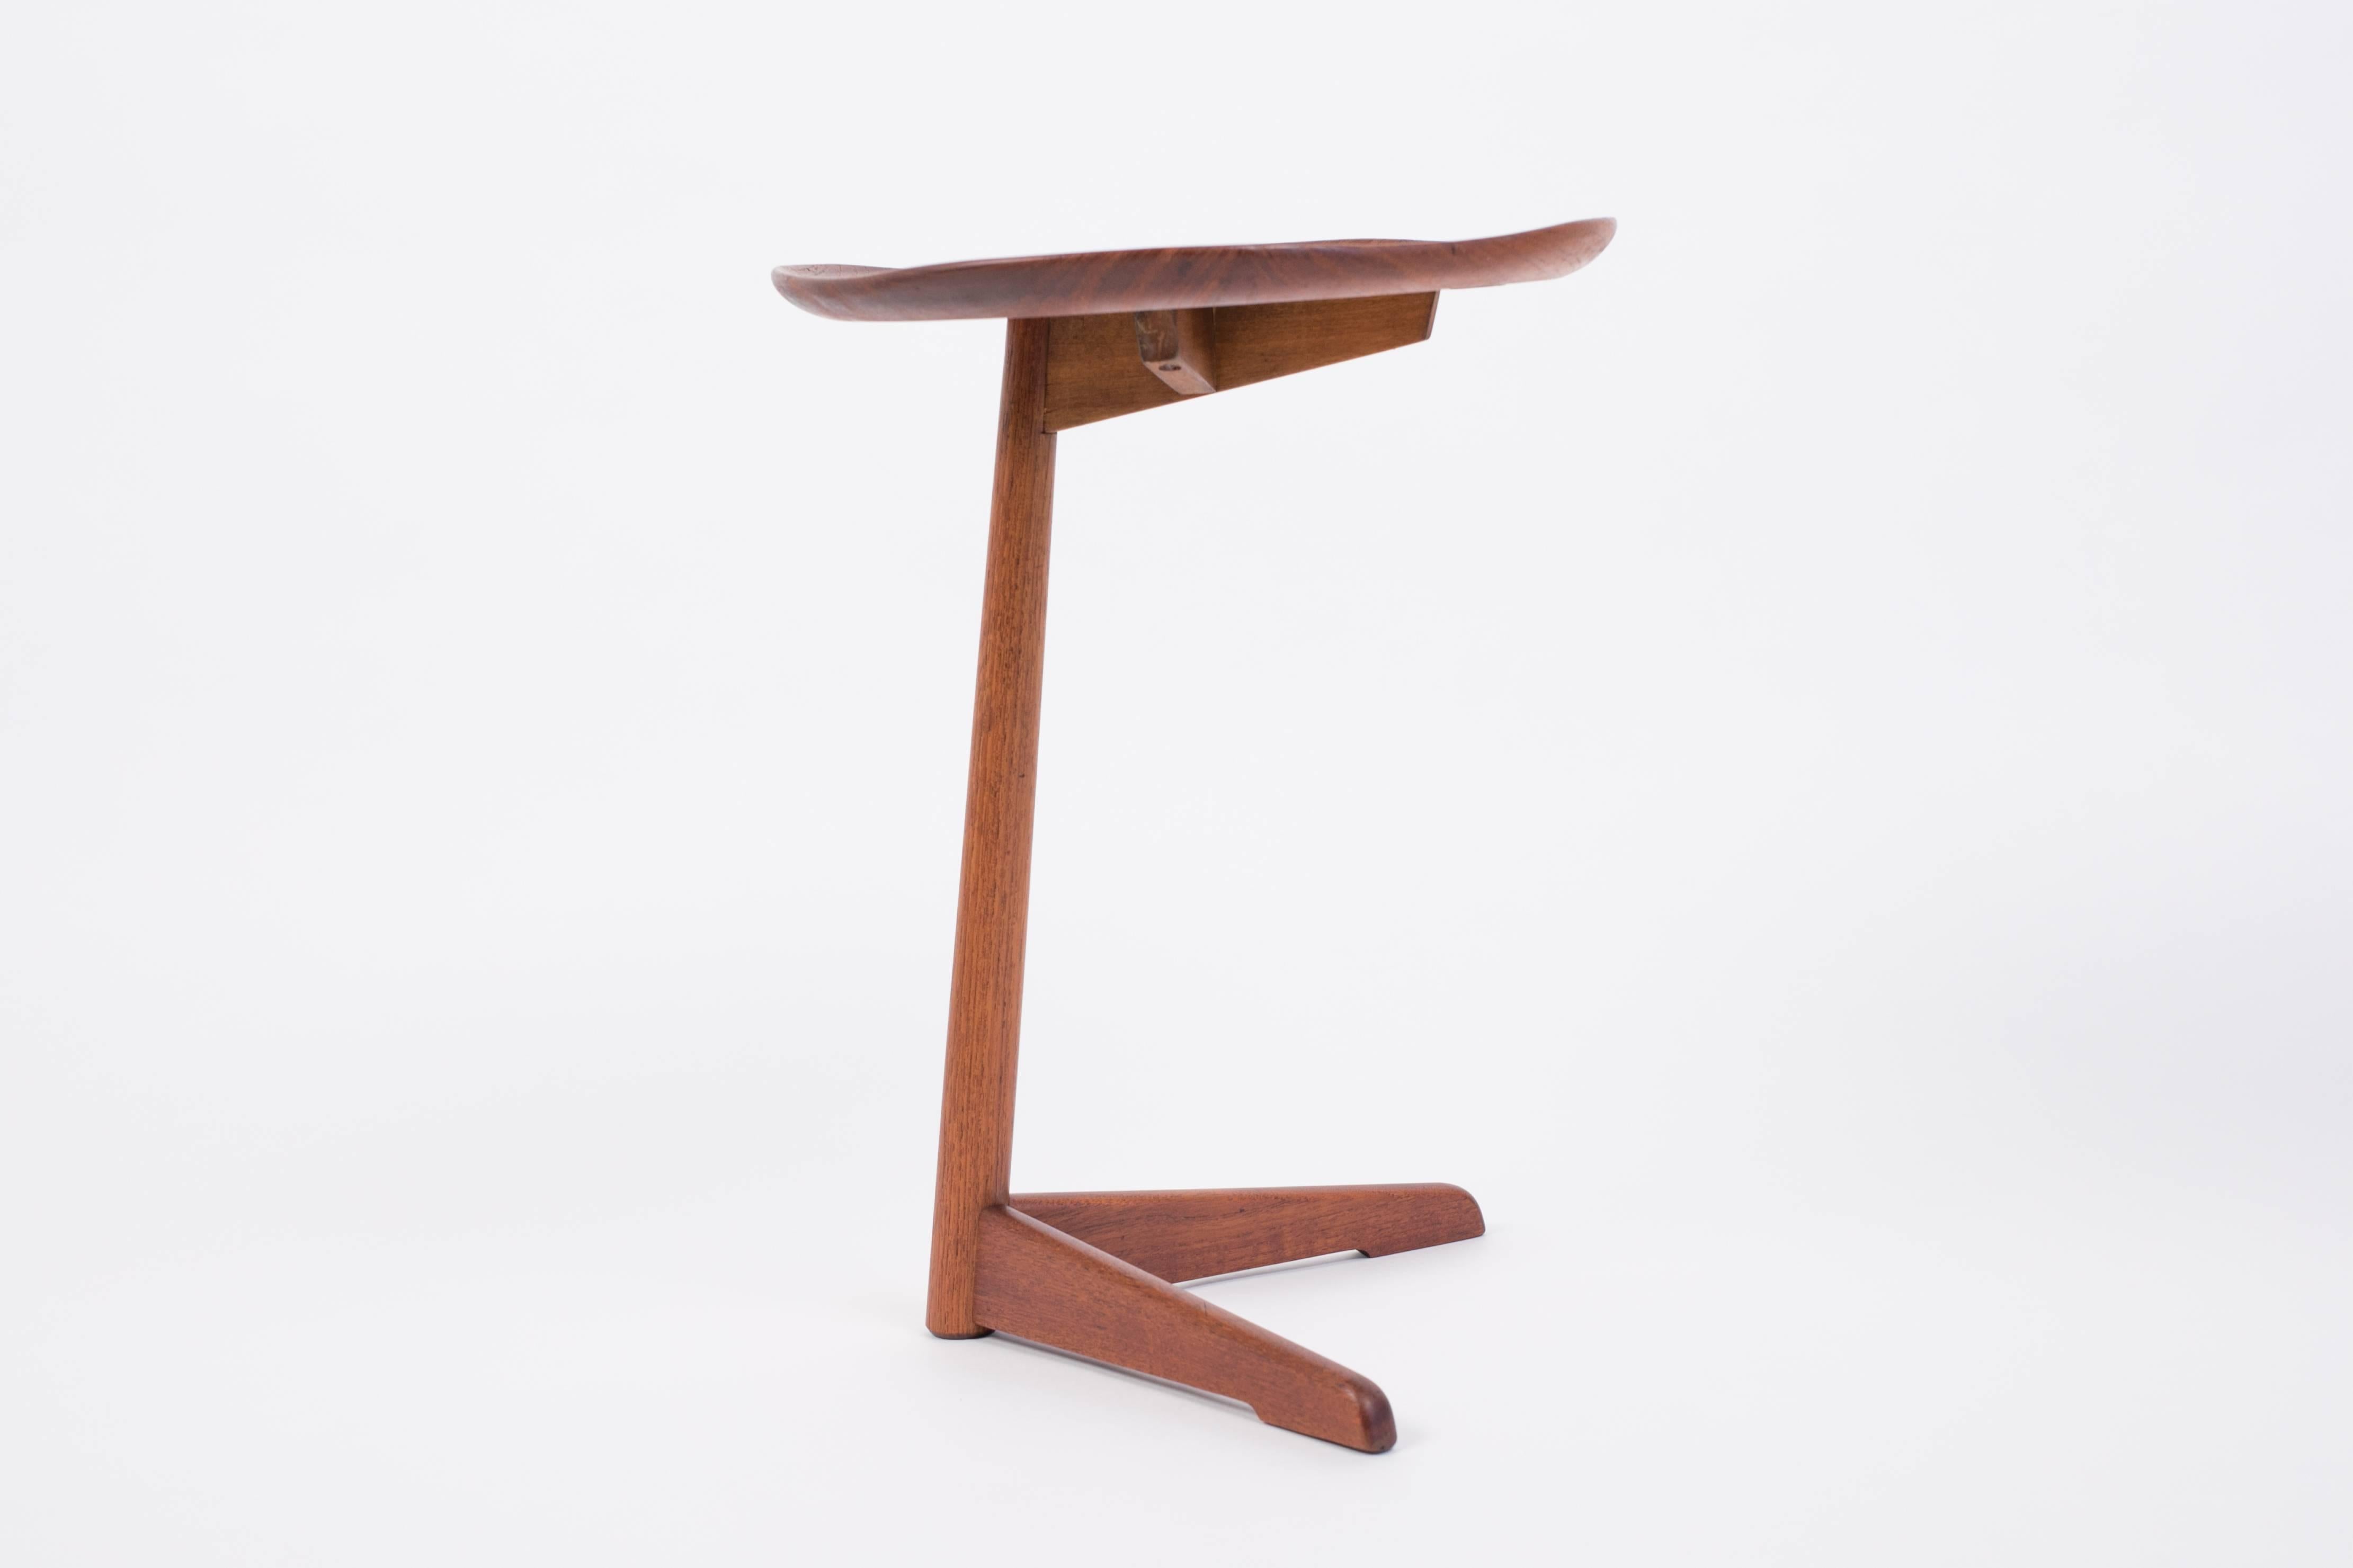 A Norwegian modern side table in solid teak with a cantilevered design and an irregular, fluted tabletop edge. The table has a forked base connected to the tabletop via a turned teak post. Designed and produced for Steen & Strøm’s Møbelfabrikk of